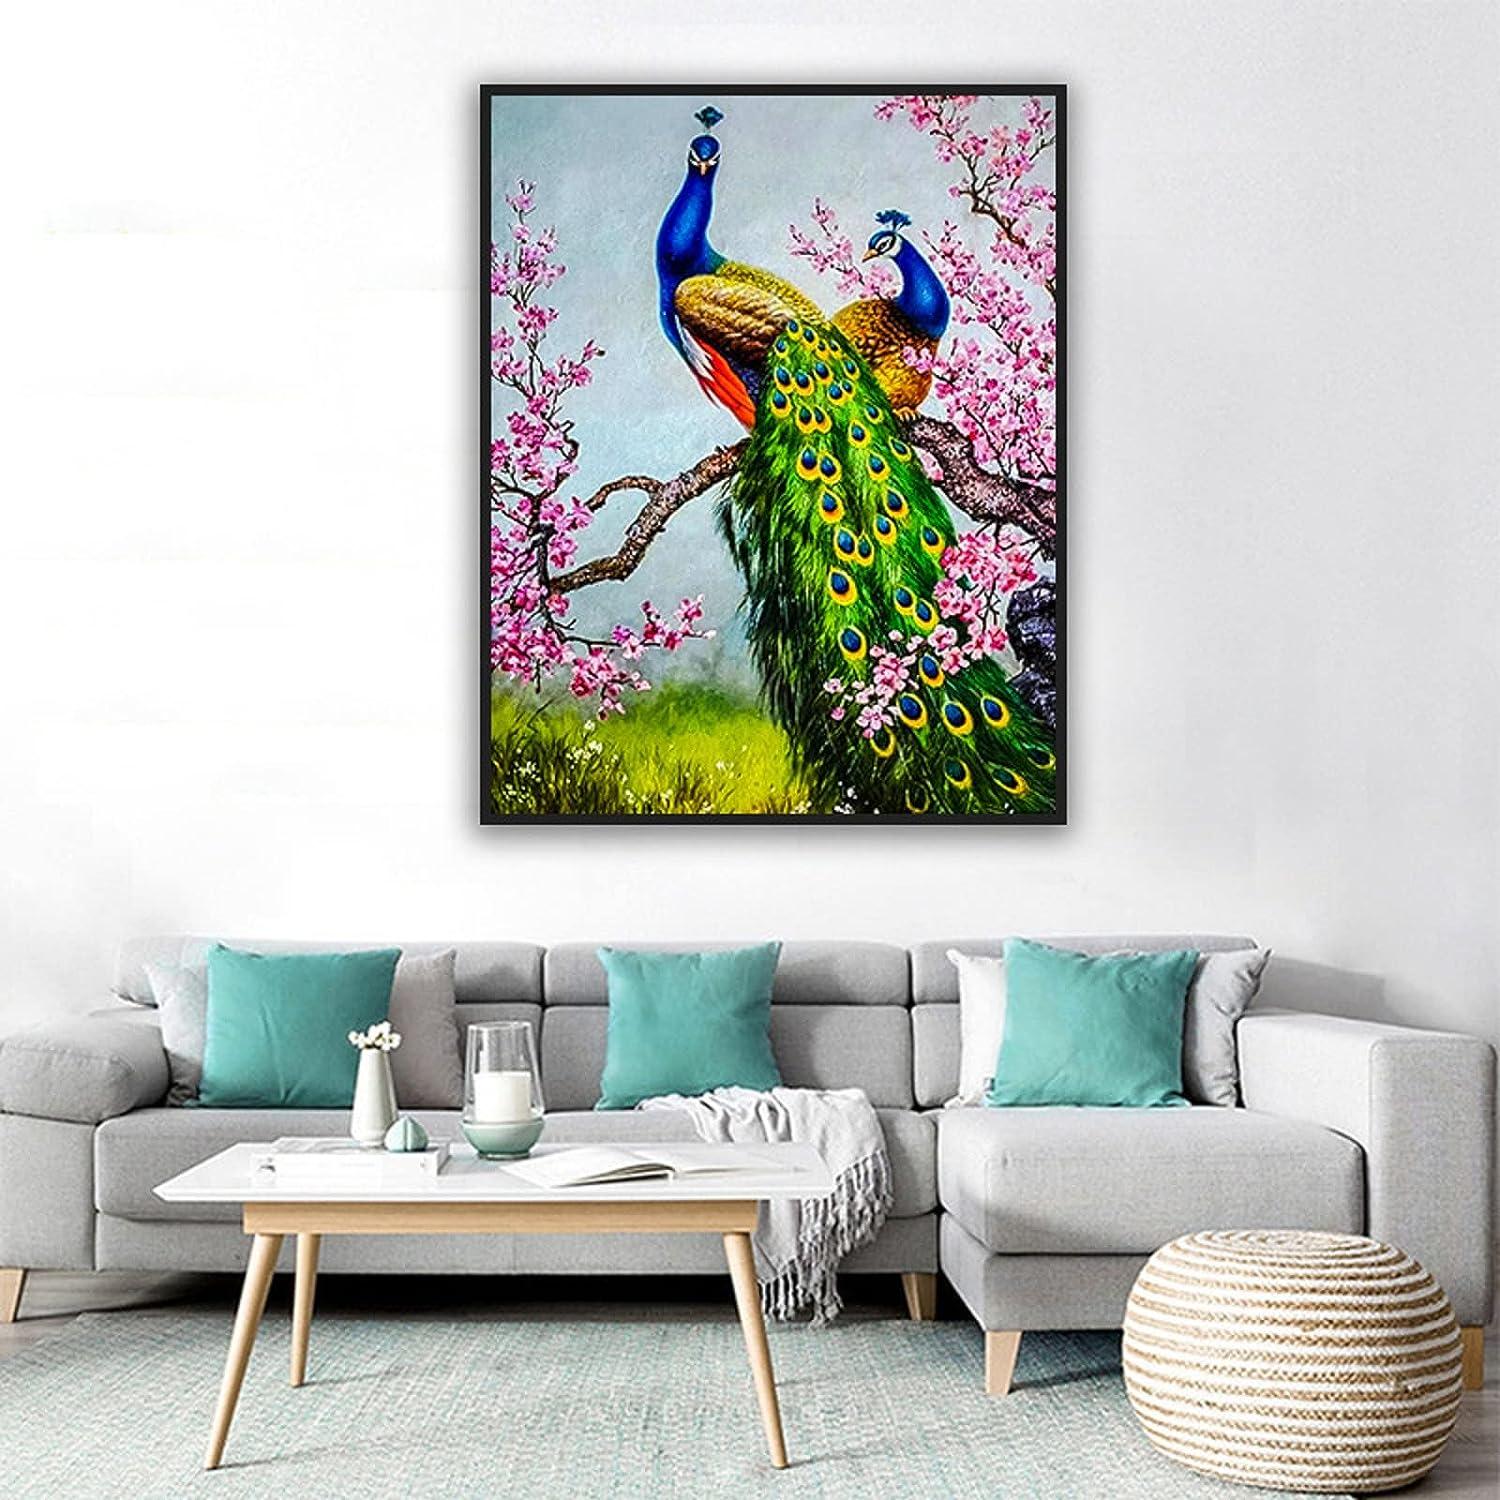 Peacock, Tapestry, Wall-hanging, Kit, Cushion, Picture, Needlepoint,  Counted Cross Stitch, Historical, Arts and Crafts, Floral, Embroidery 